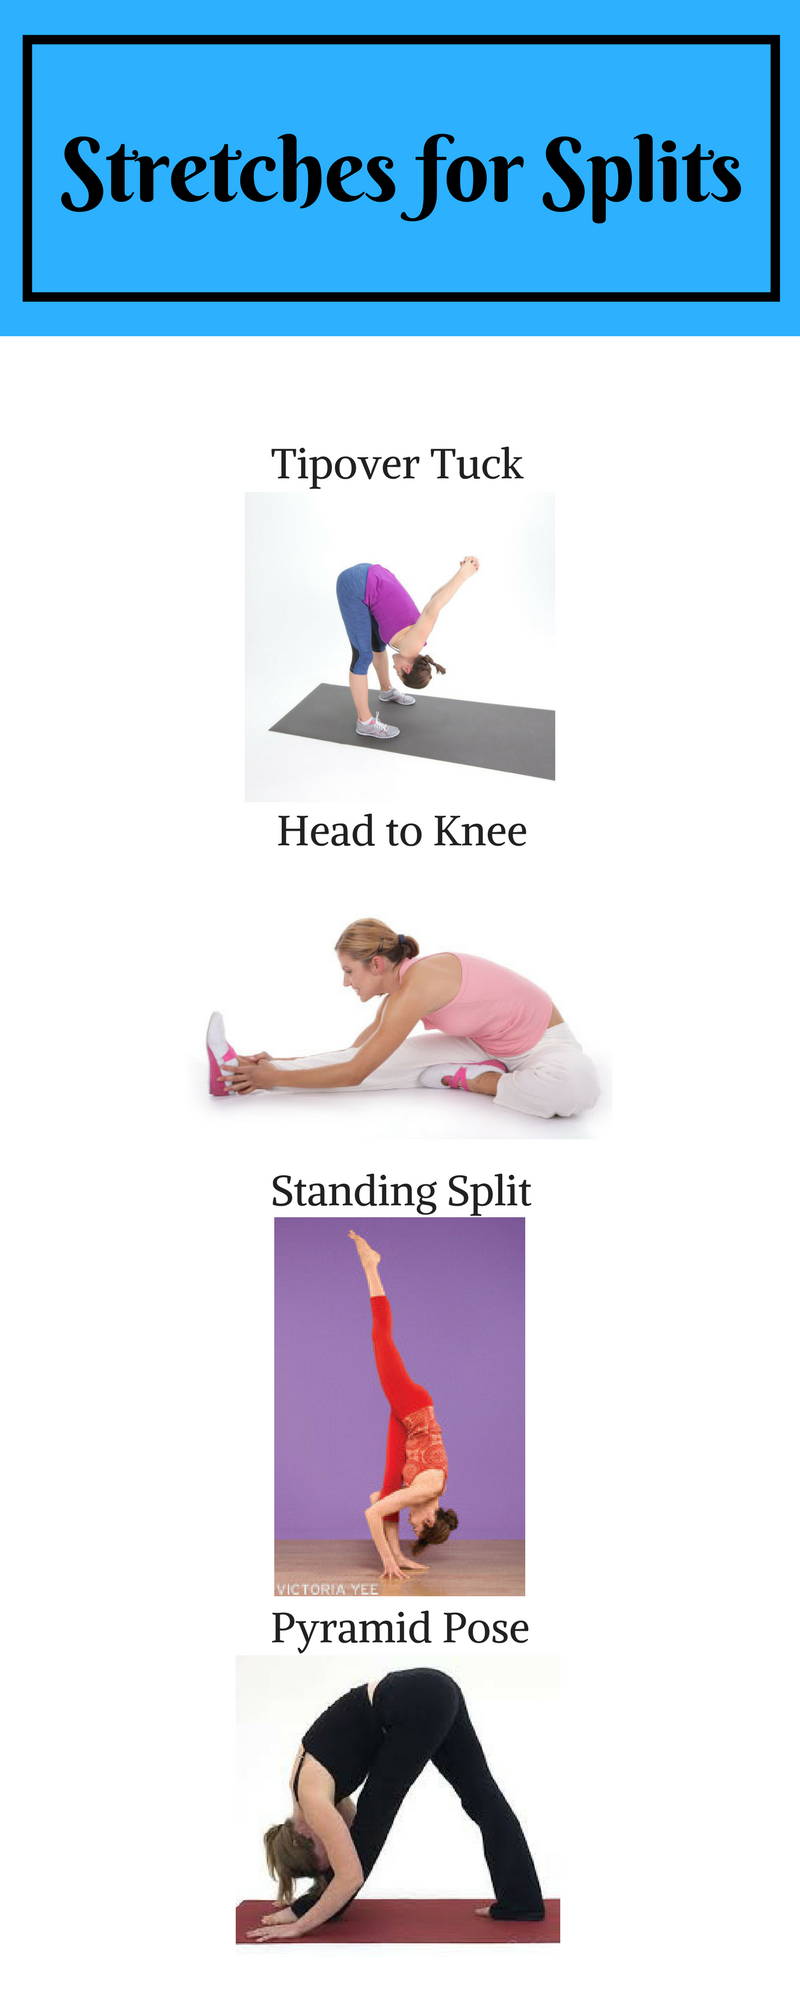 Stretches for Splits.png